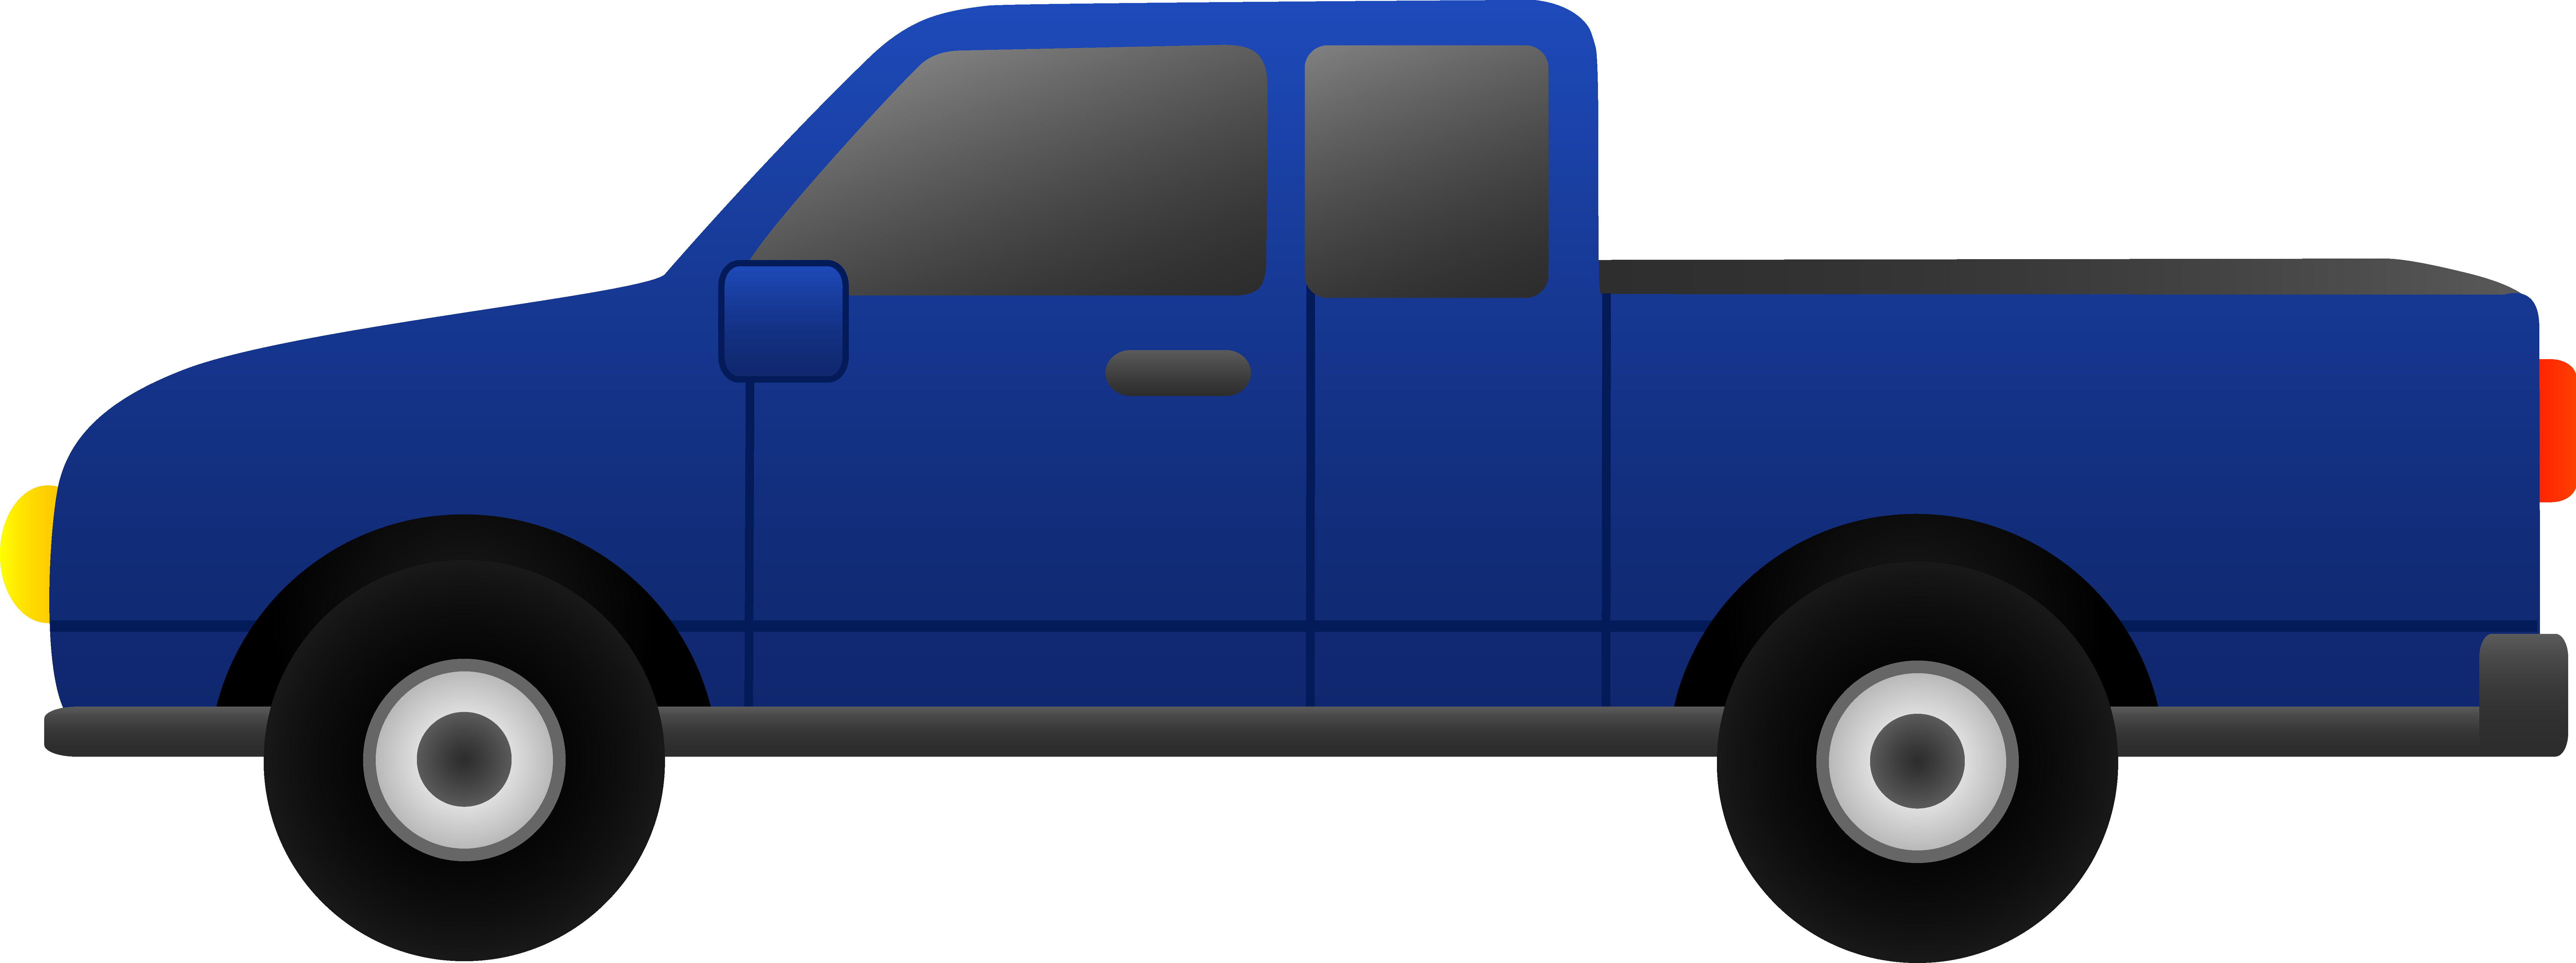 Chevy Pickup Truck Clipart | Clipart Panda - Free Clipart Images